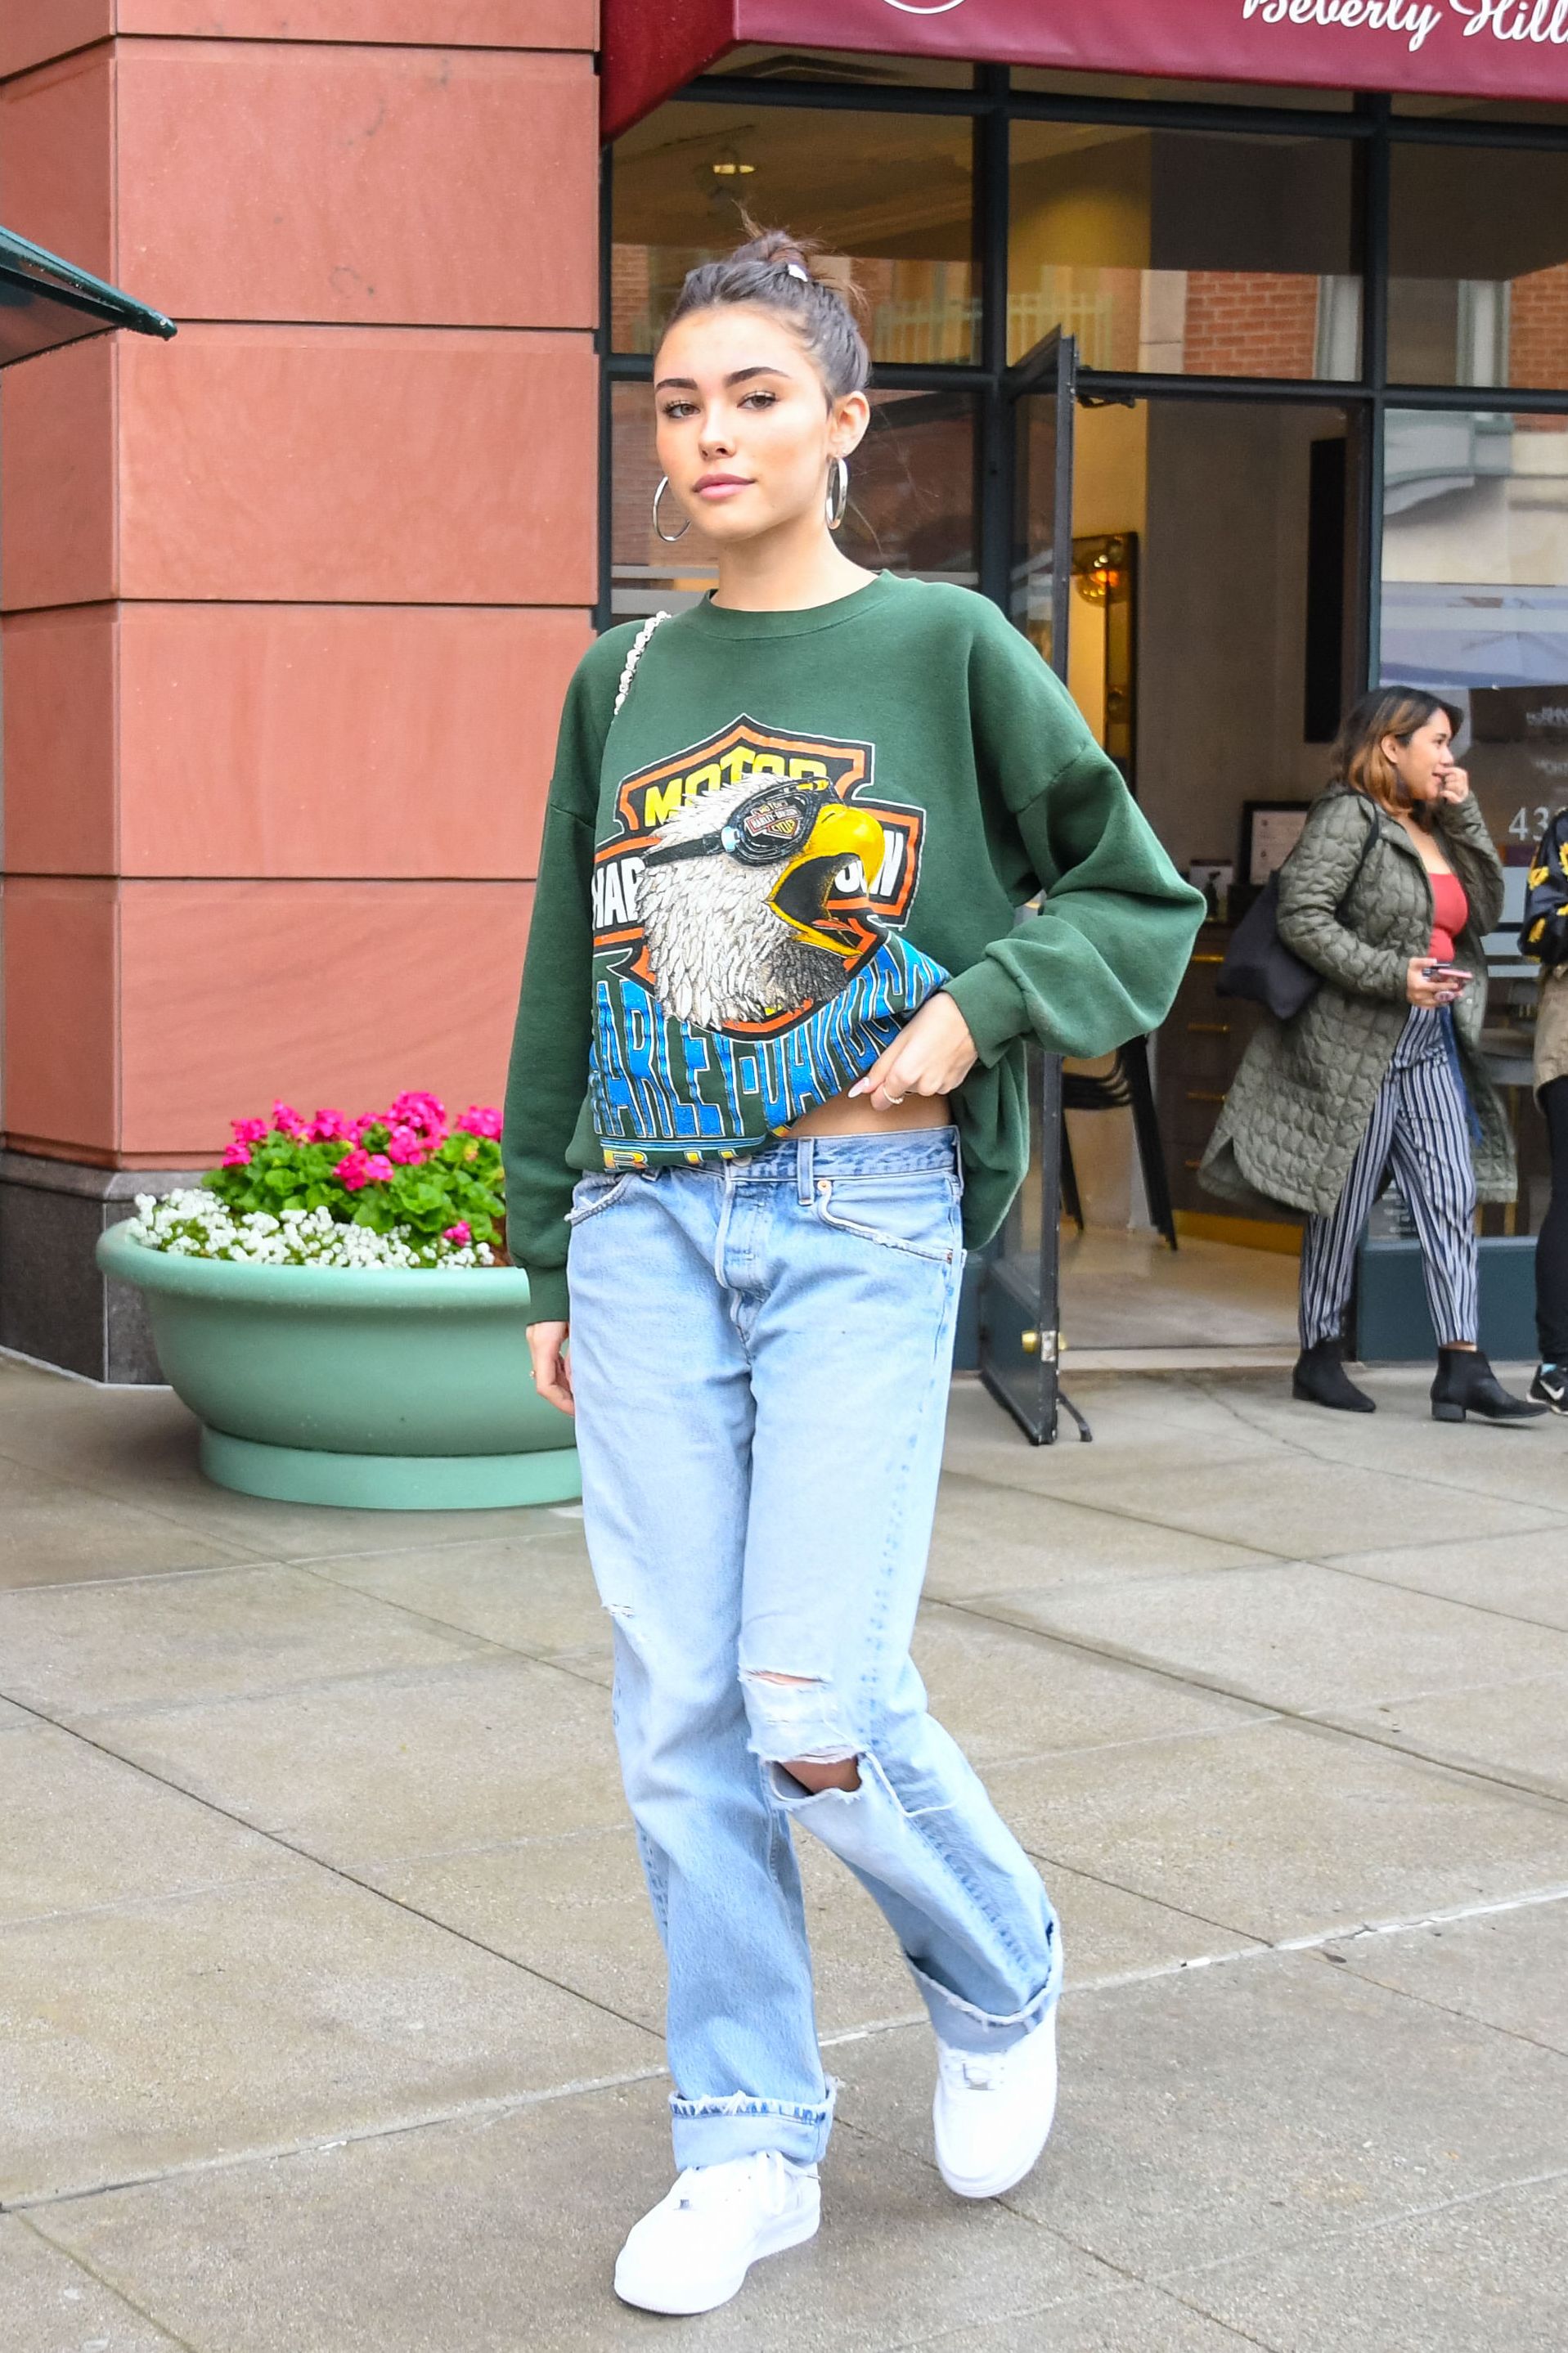 21 Ripped Jeans Outfits - How to Wear Ripped, Distressed Denim